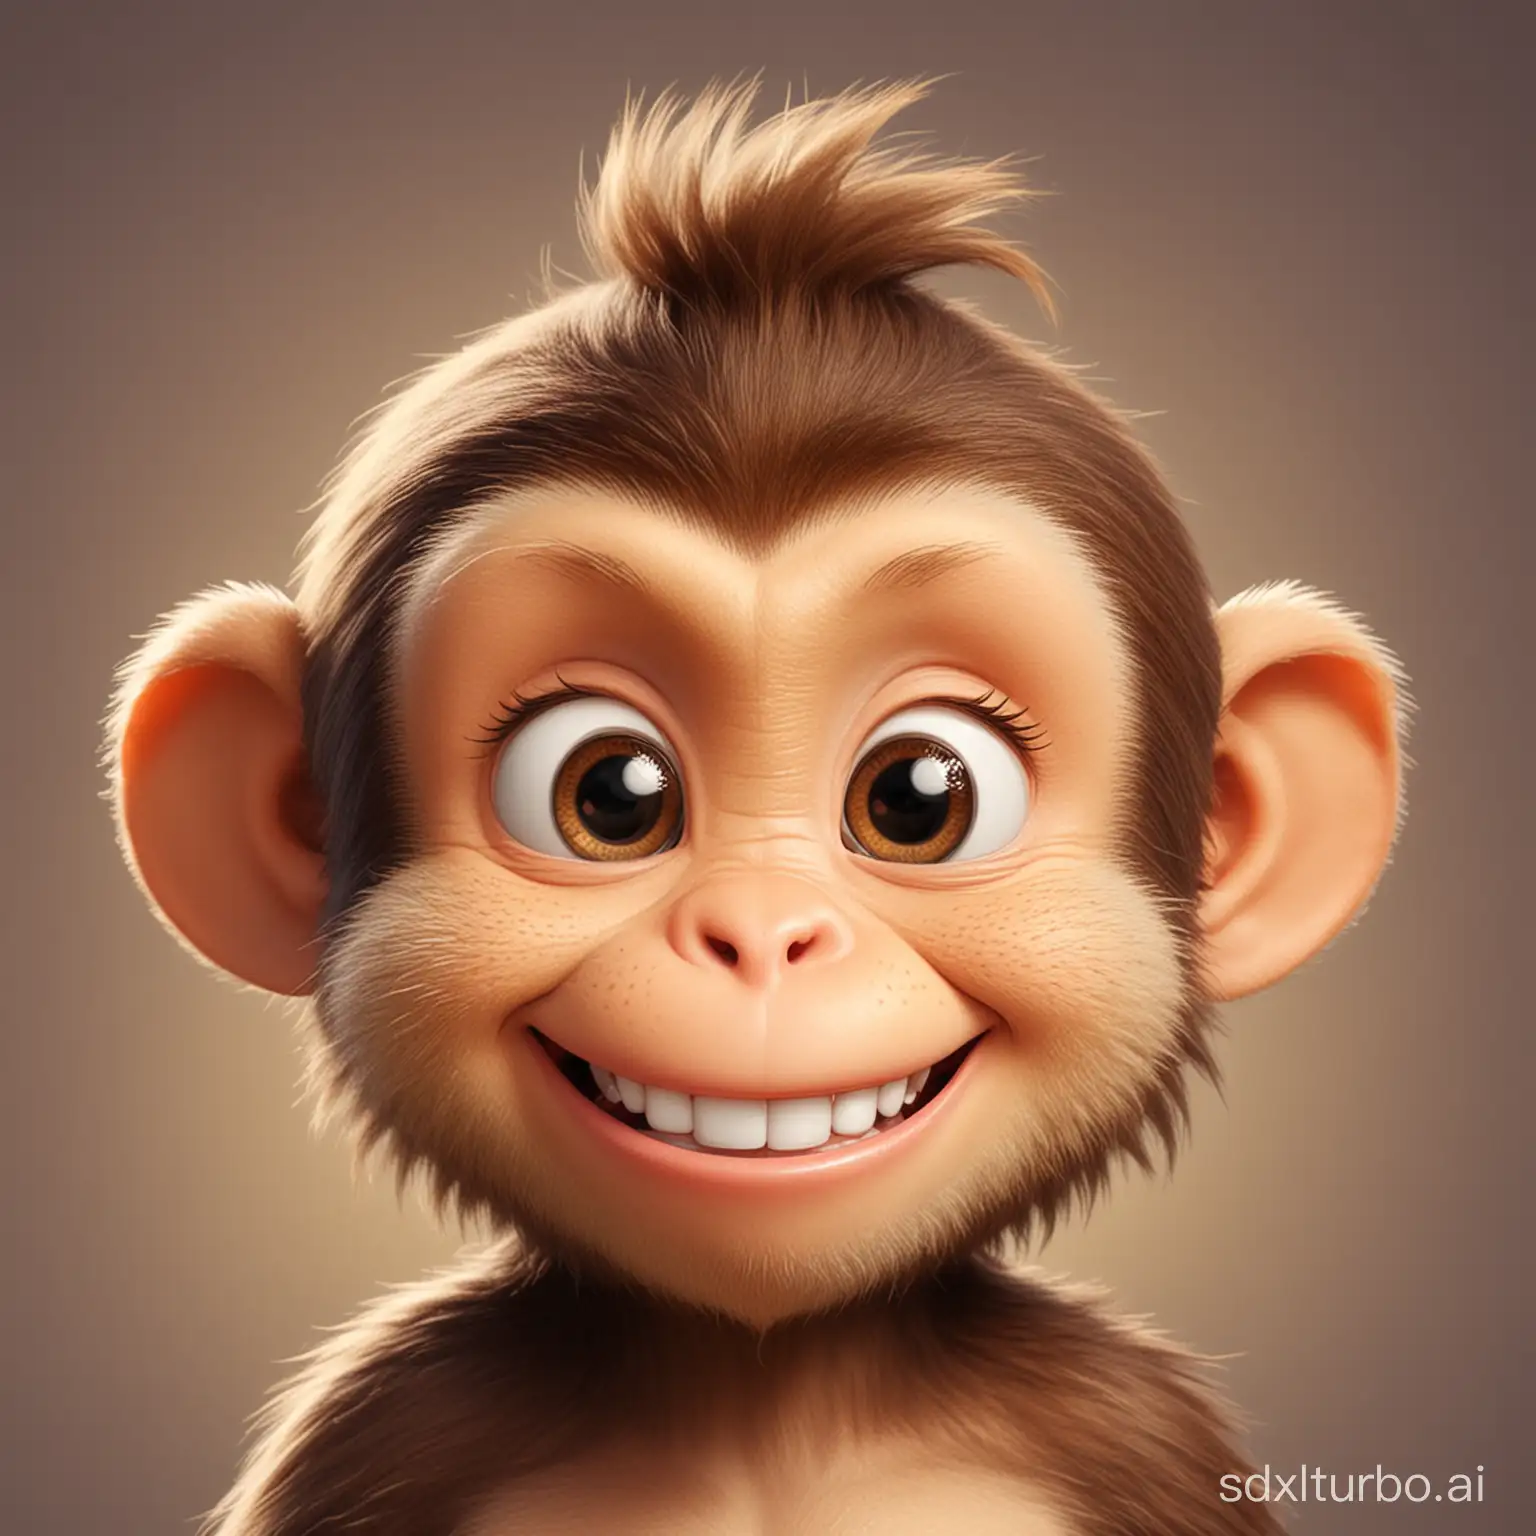 A cute monkey avatar with a smile